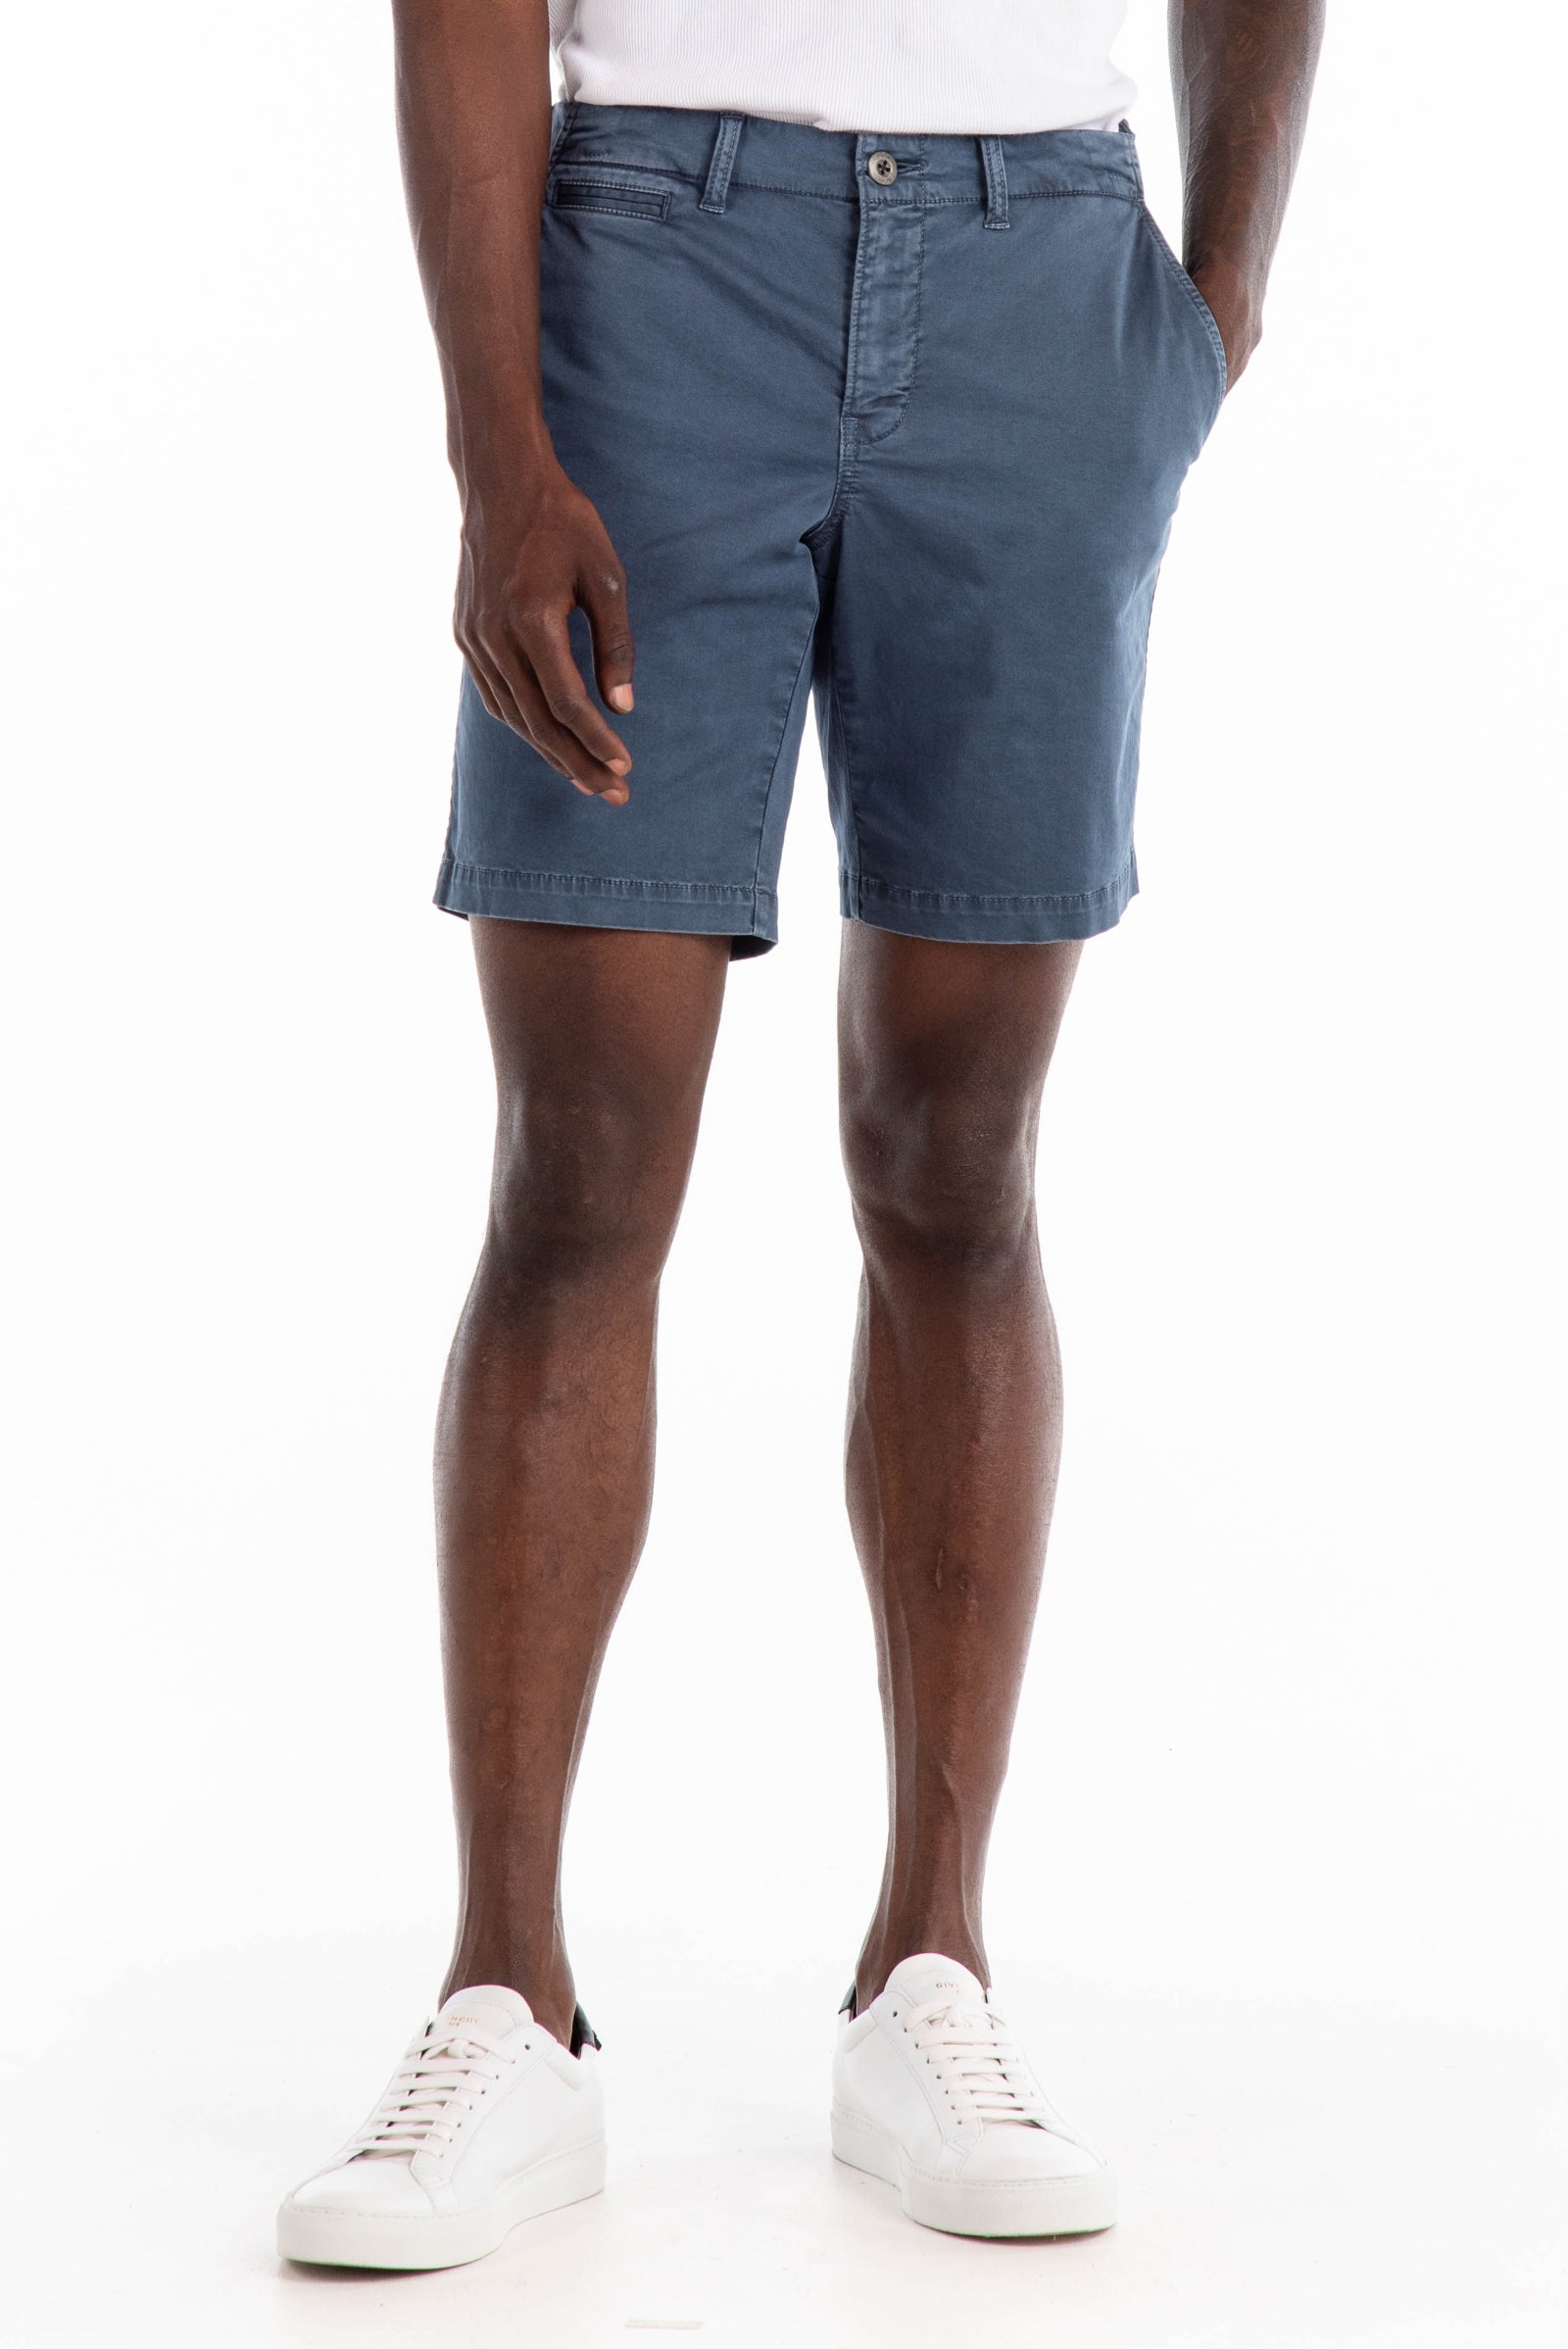 Original Paperbacks Walden Chino Short in Slate on Model Cropped Styled View